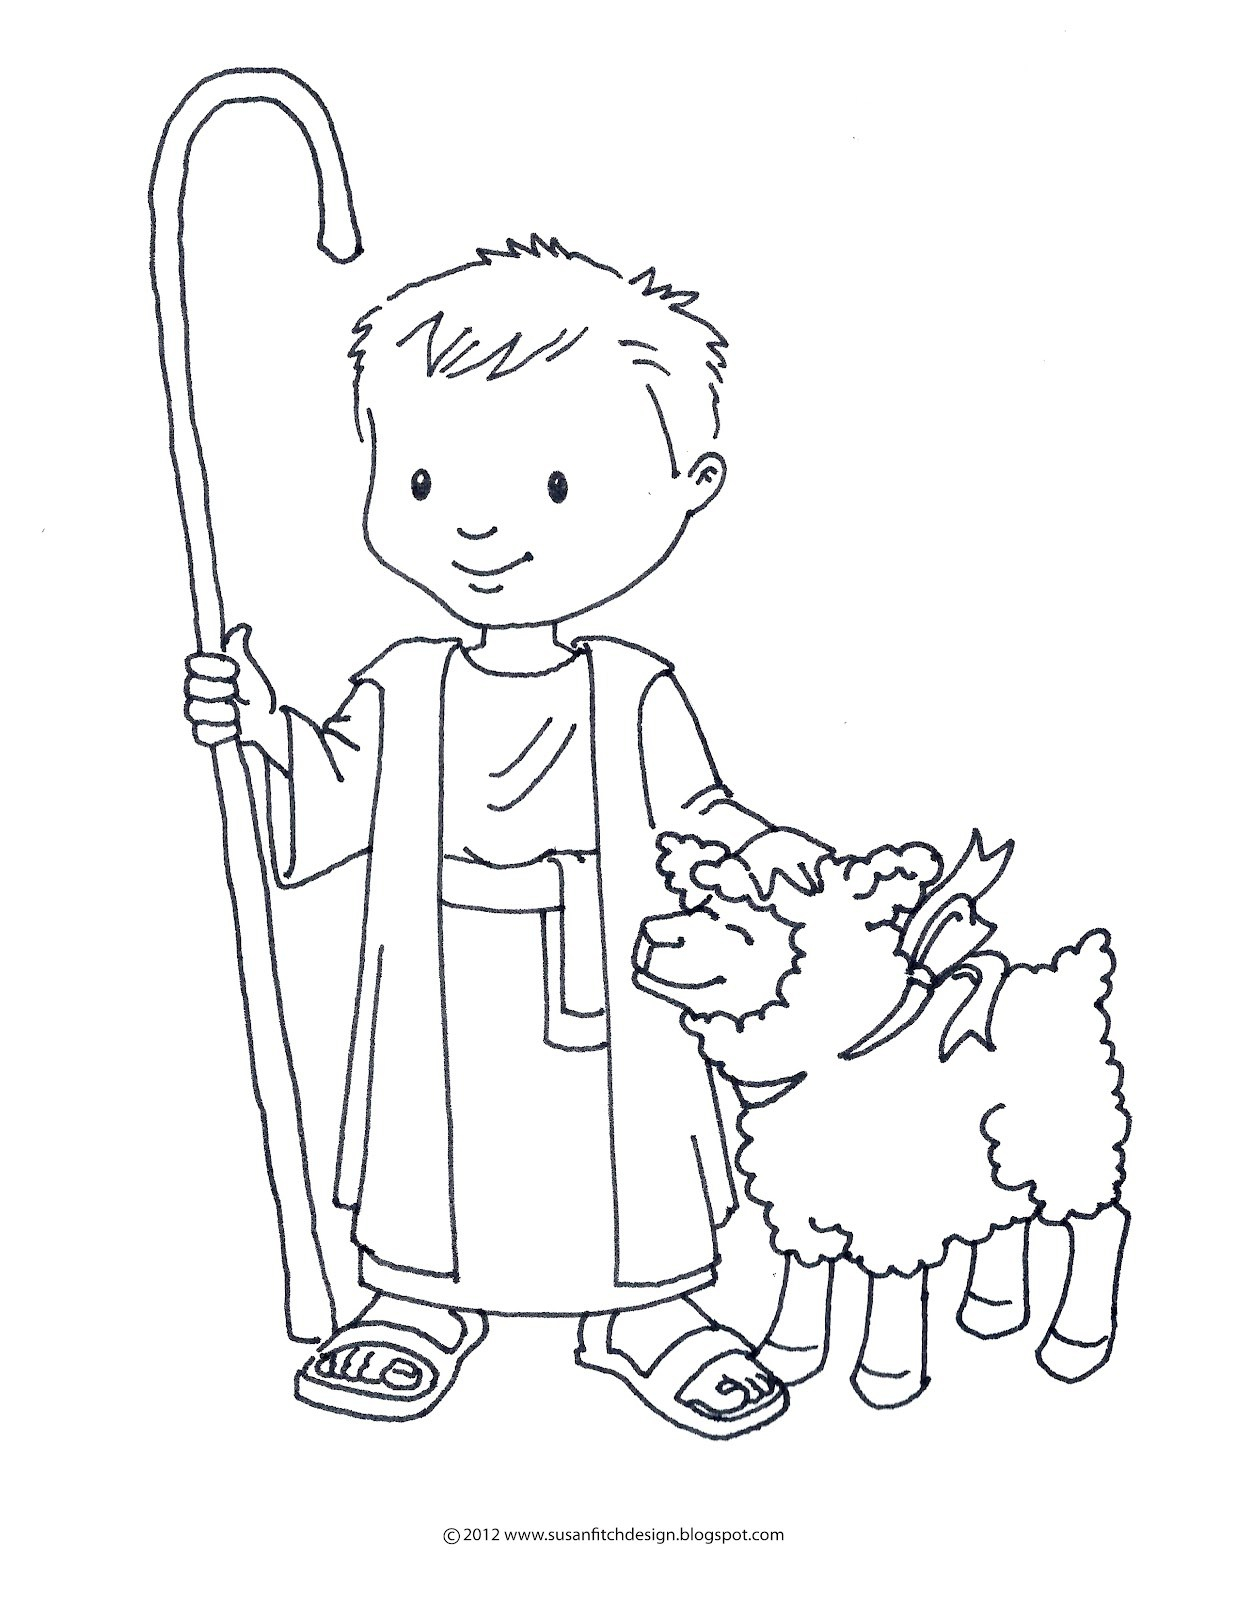 Coloring Pages Sheep And The Shepherd Coloring Pages Sheep And The Shepherd Coloring Online